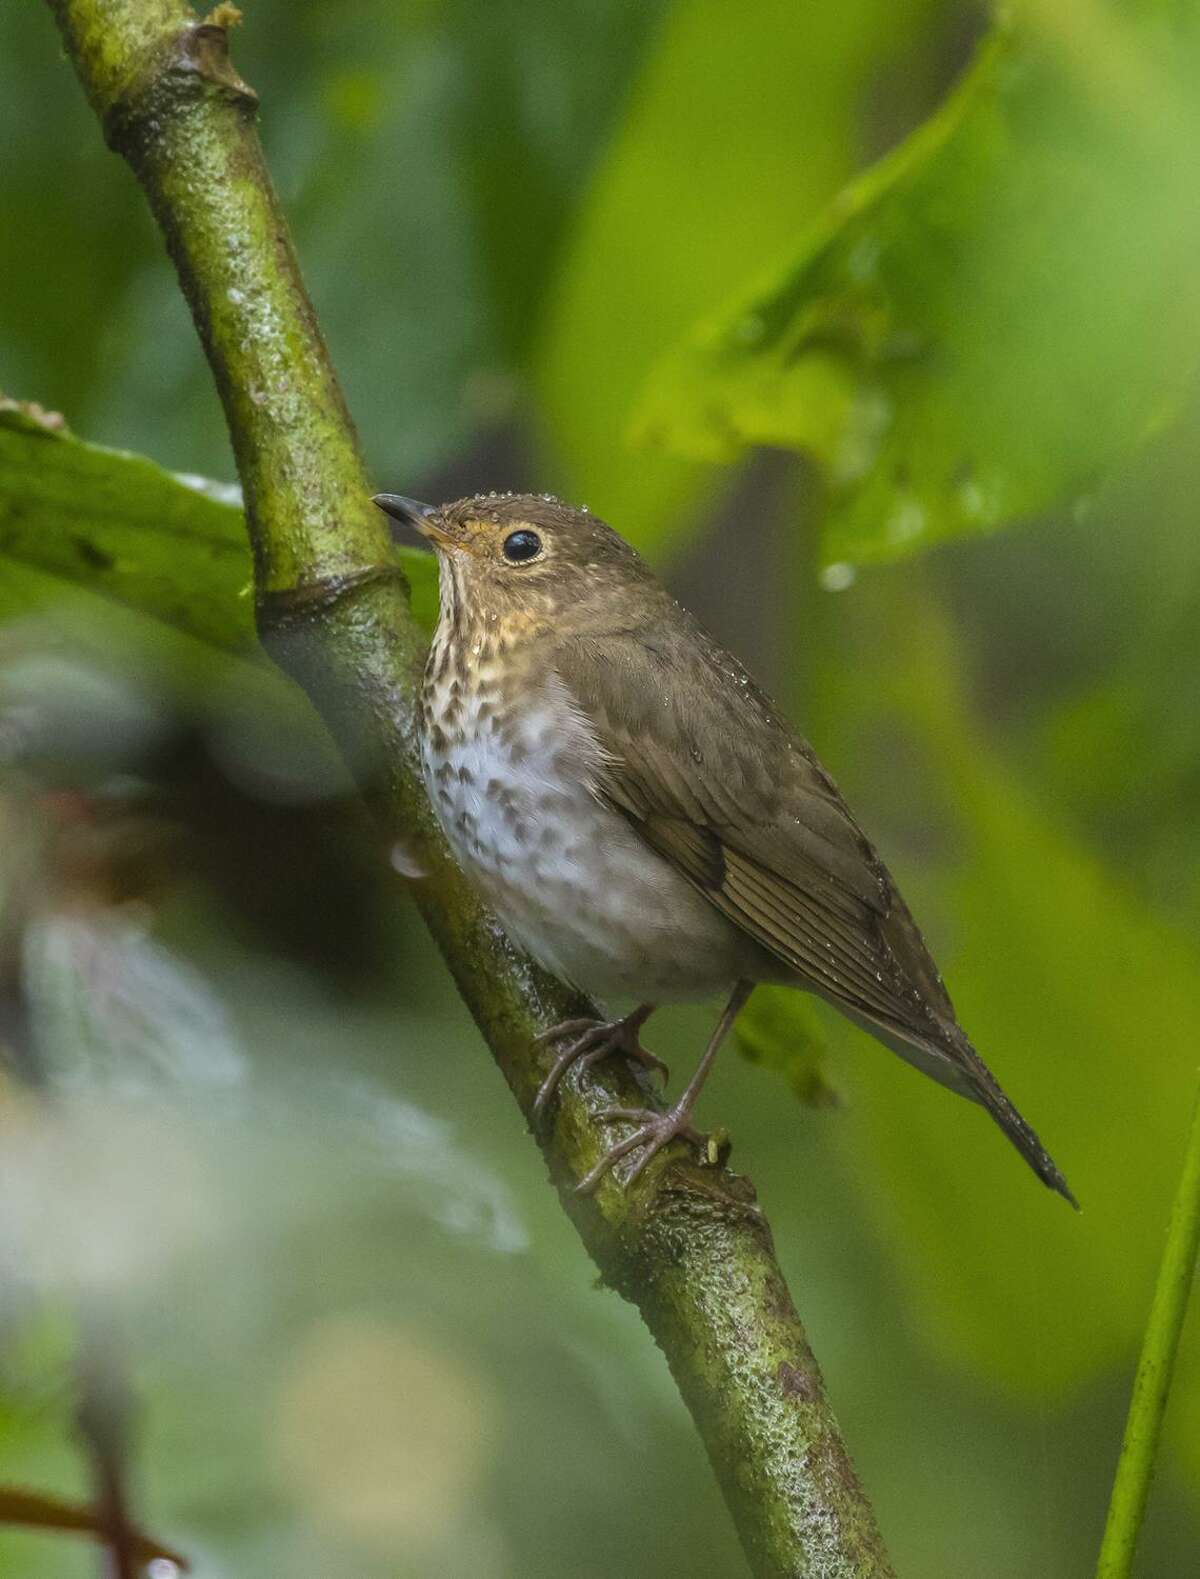 A Swainson’s thrush perches under a leaf during a rain shower in the Mindo Valley of Ecuador. The birds migrate through Texas on their way to breeding grounds in the north.